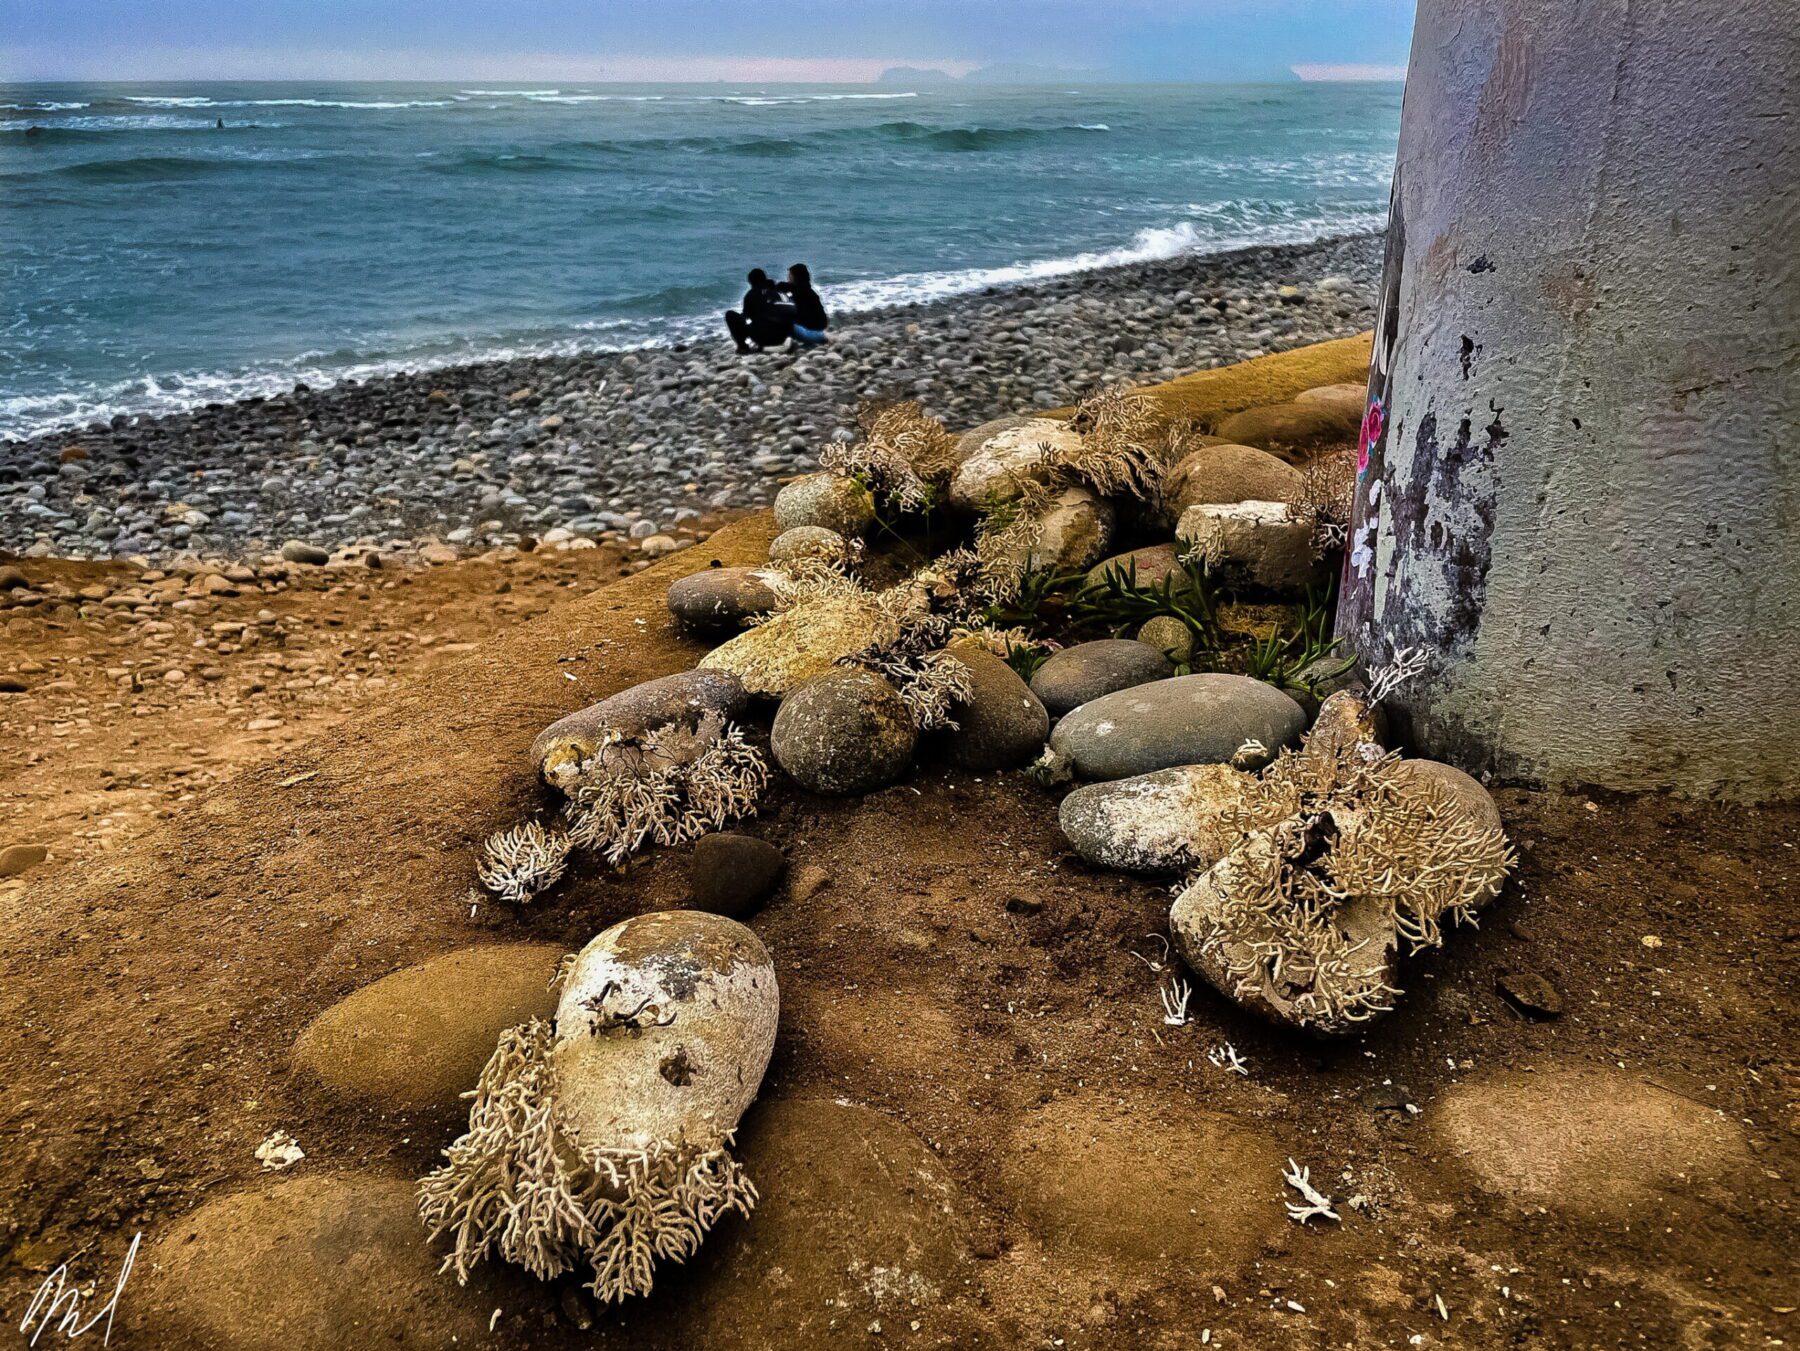 A pile of Peru on the beach next to a pole.